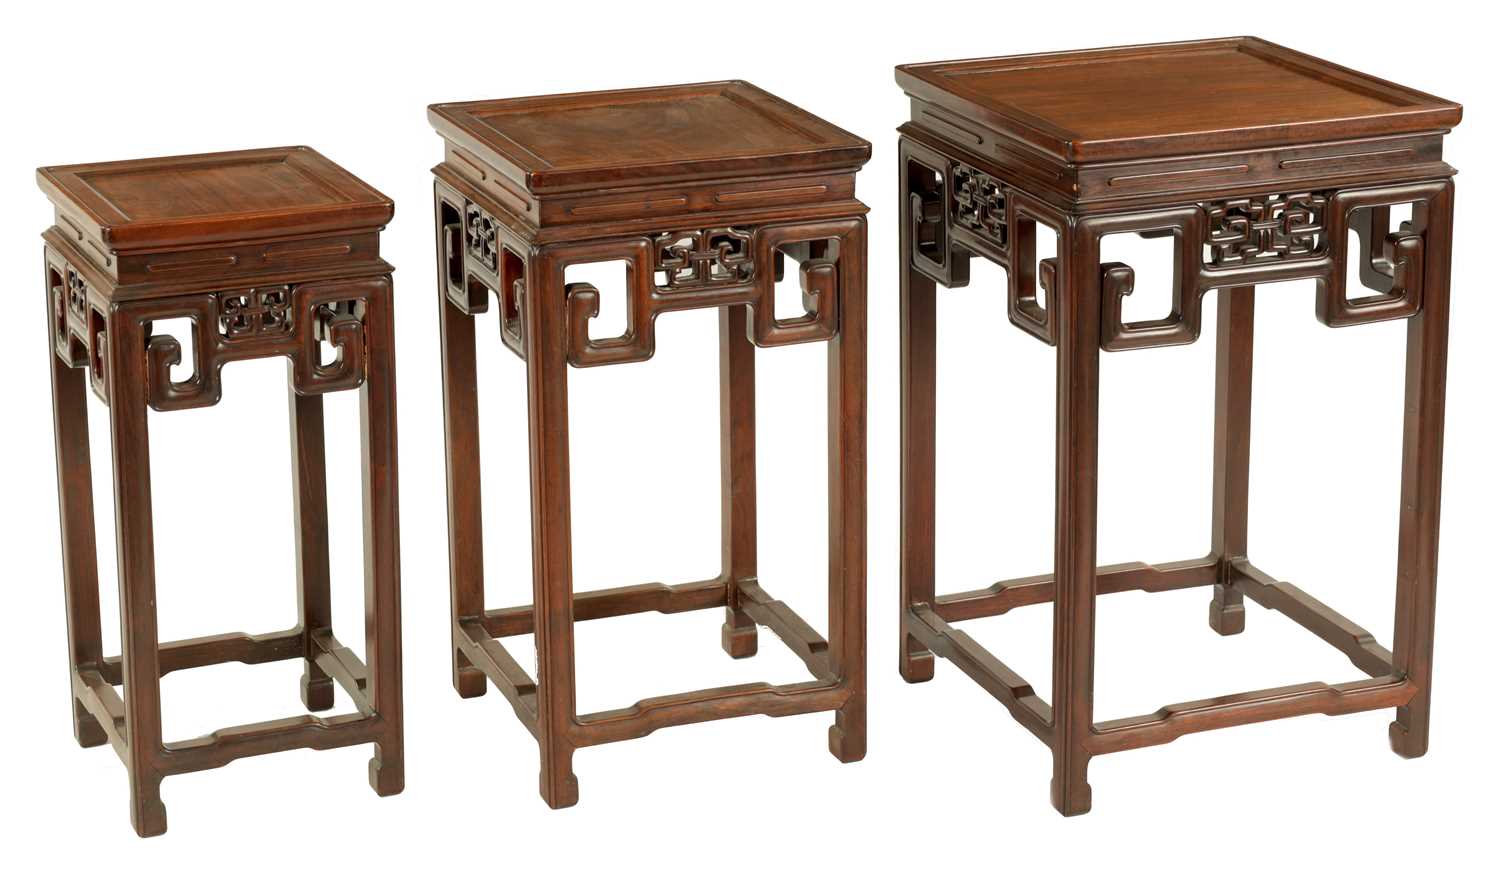 Lot 191 - A GOOD SET OF THREE 19TH CENTURY CHINESE HARDWOOD OCCASIONAL TABLES POSSIBLY HUANGHUALI WOOD